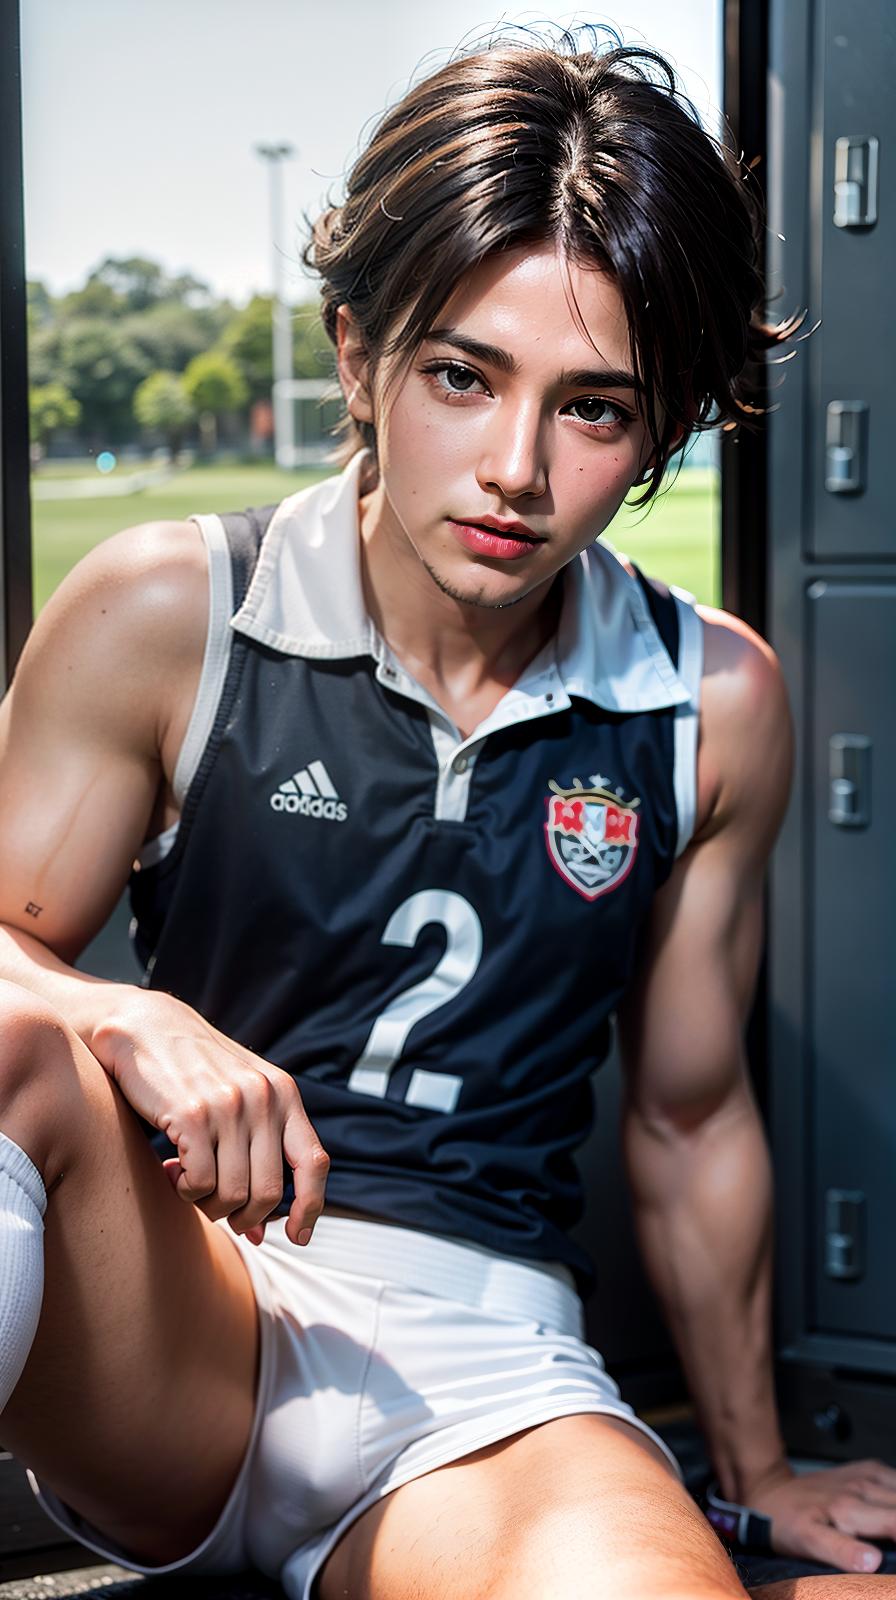  ultra high res, (photorealistic:1.4), raw photo, (realistic face), realistic eyes, (realistic skin), <lora:XXMix9_v20LoRa:0.8>, handsome, (male:2.3), (young soccer players:1.4), (pompadour:1.2), (white briefs:1.3), (sleeveless:1.2), spike shoes, (soccer shin guards:1.3), young, sitting posture, (spread legs:1.1), real skin, (sexy posing:1.3), hot guy, (muscular:1.3), (naked:1.1), (bulge:1.1), trained calves, thigh, realistic, lifelike, high quality, photos taken with a single-lens reflex camera, (looking at the camera:1.2), (locker room:1.1)